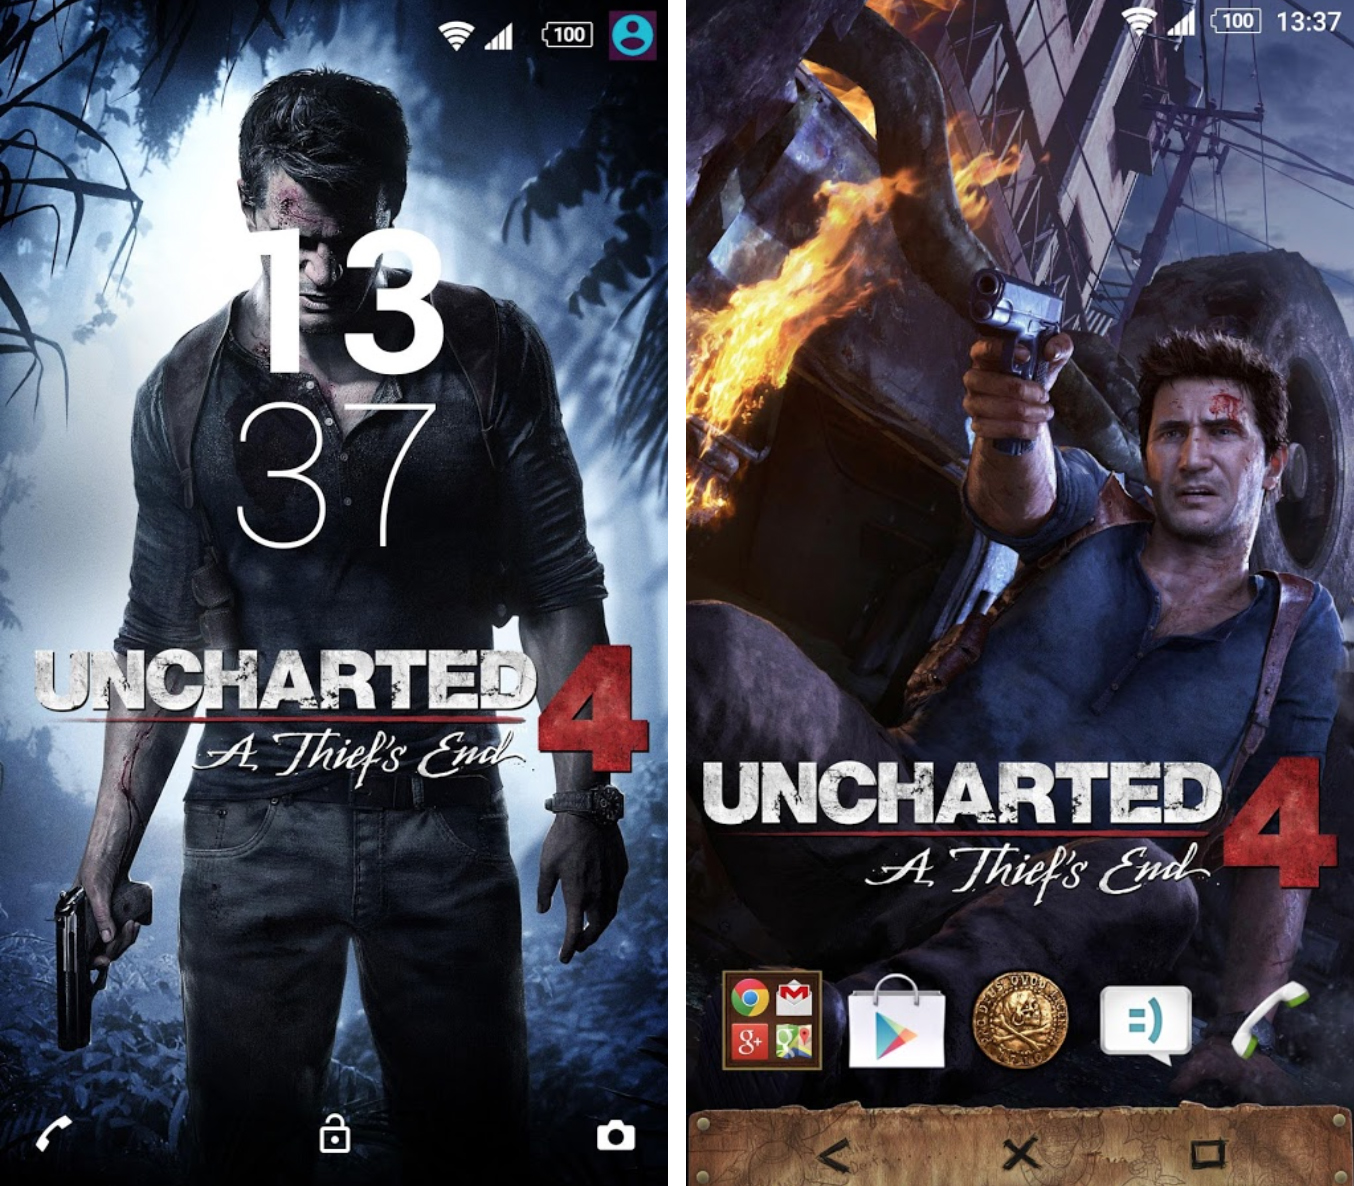 Download Xperia Uncharted 4 Theme 